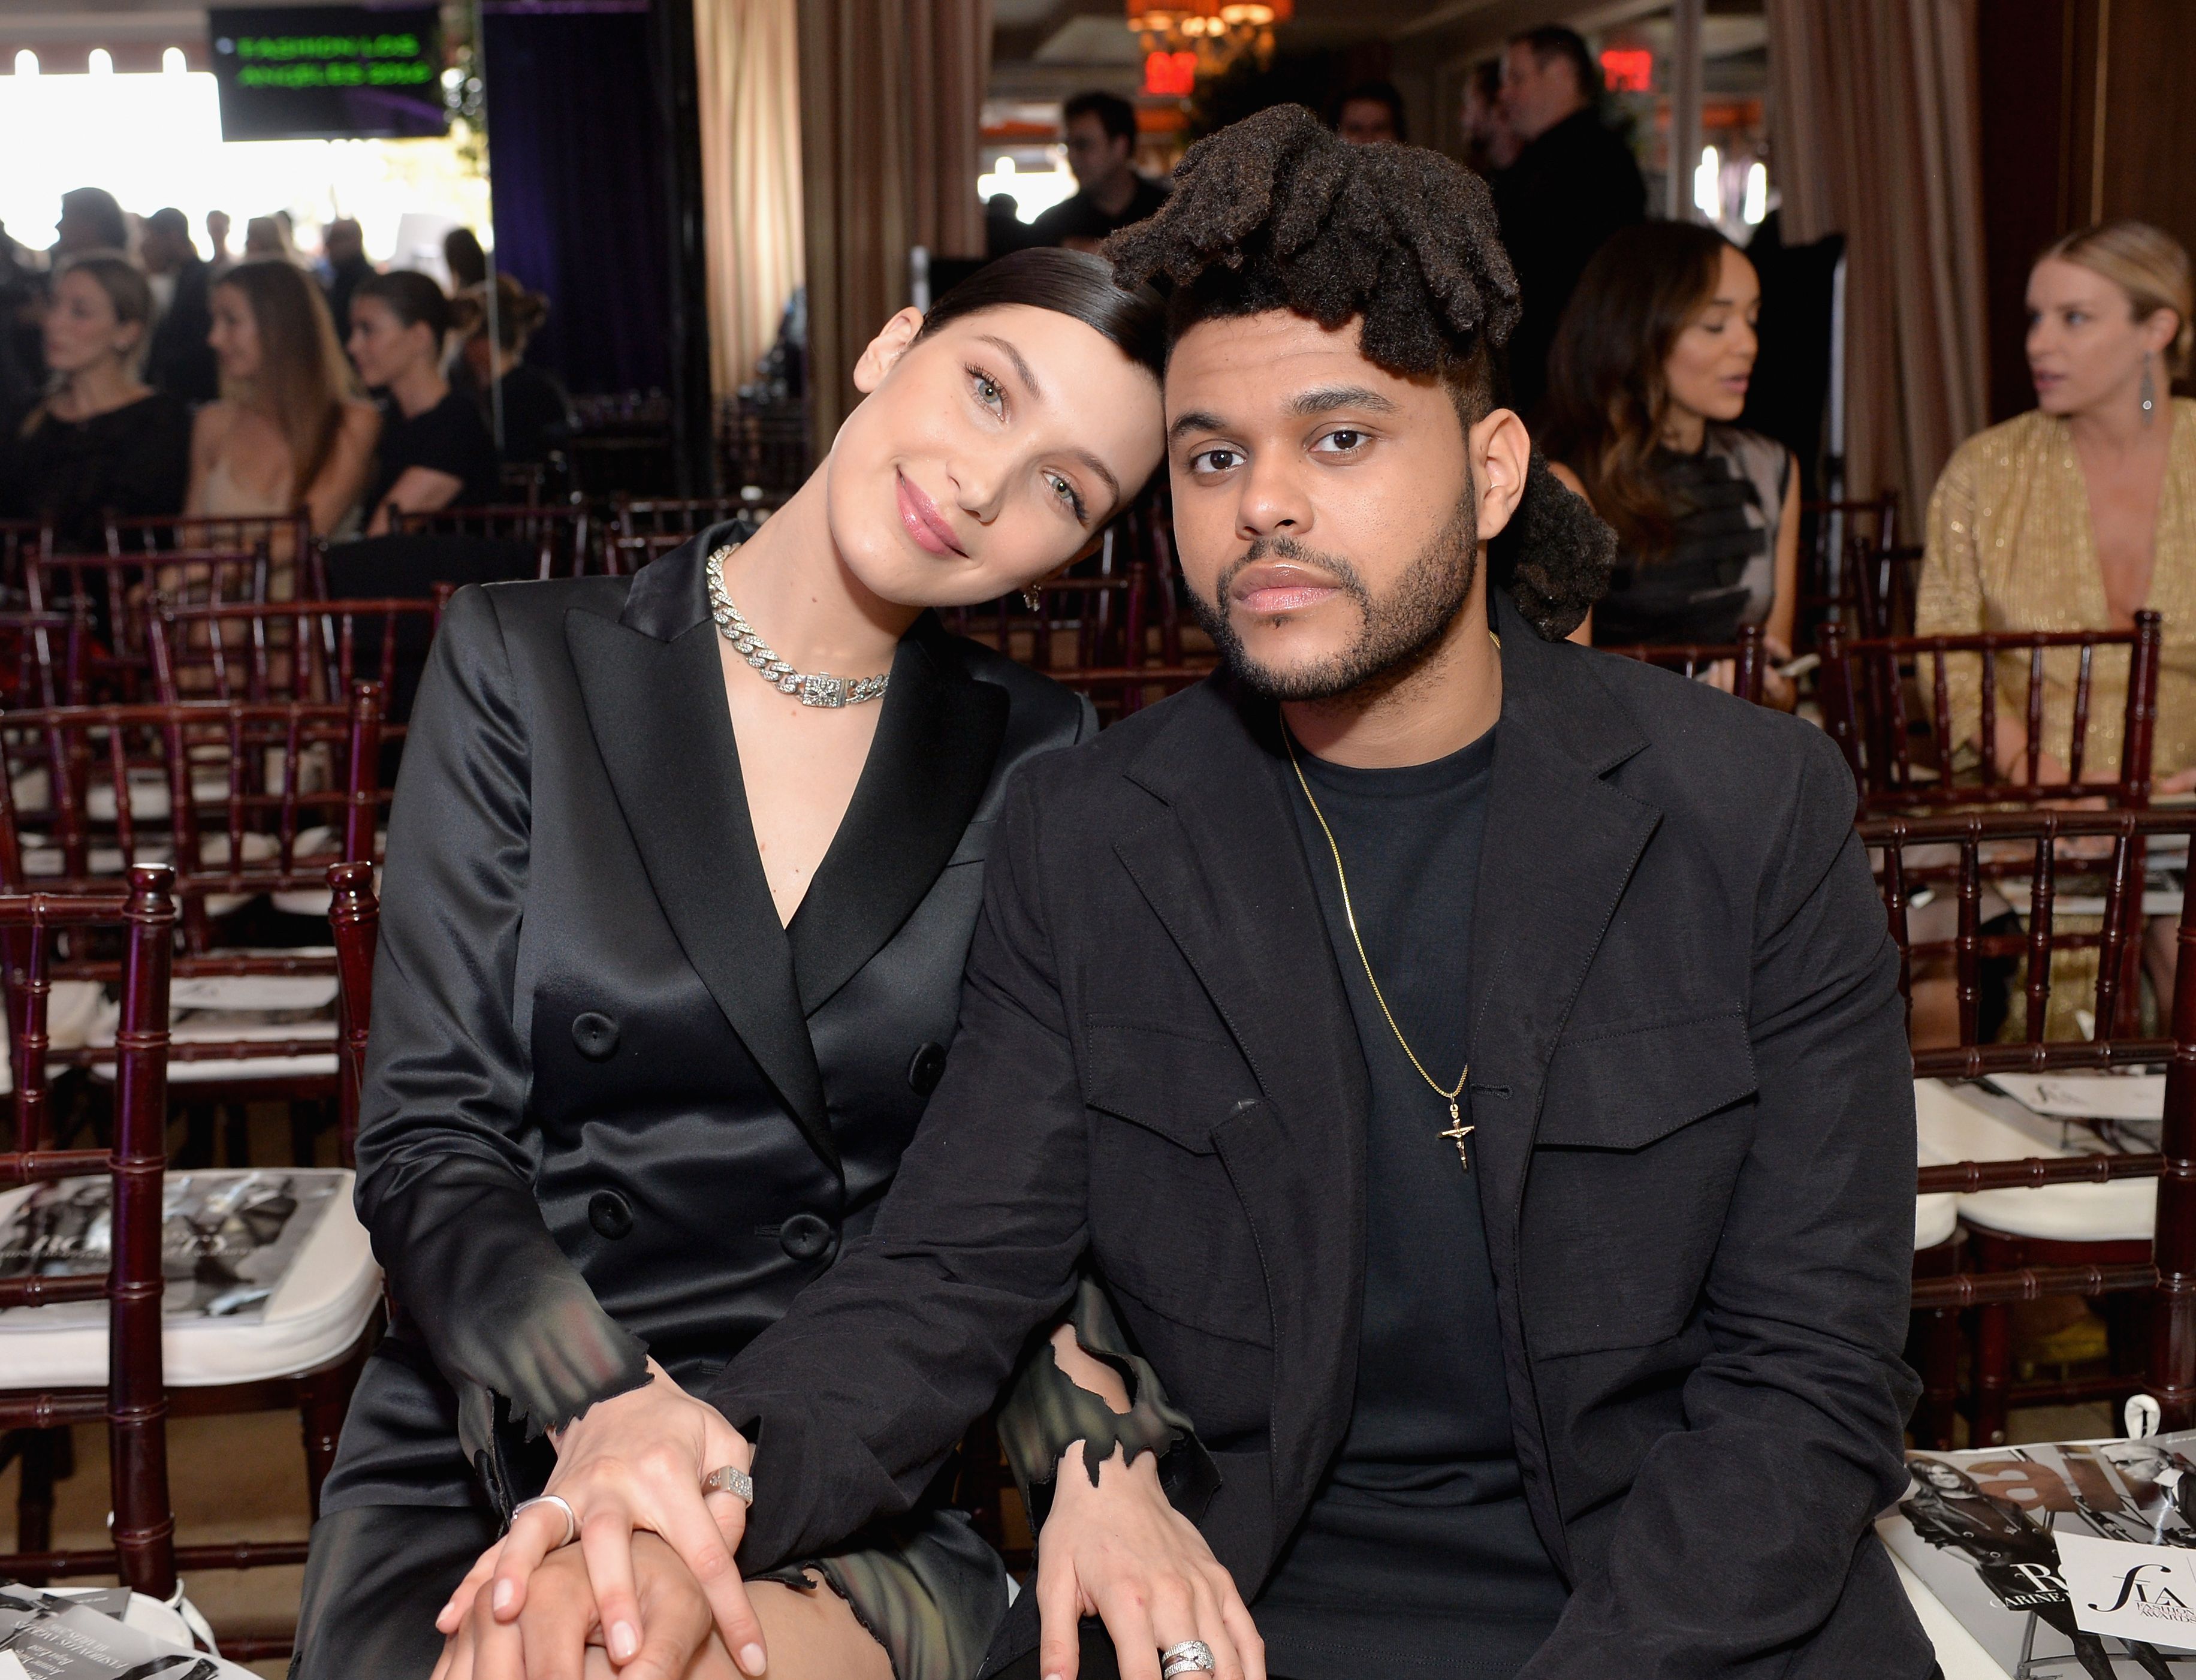 Who is the weeknd dating